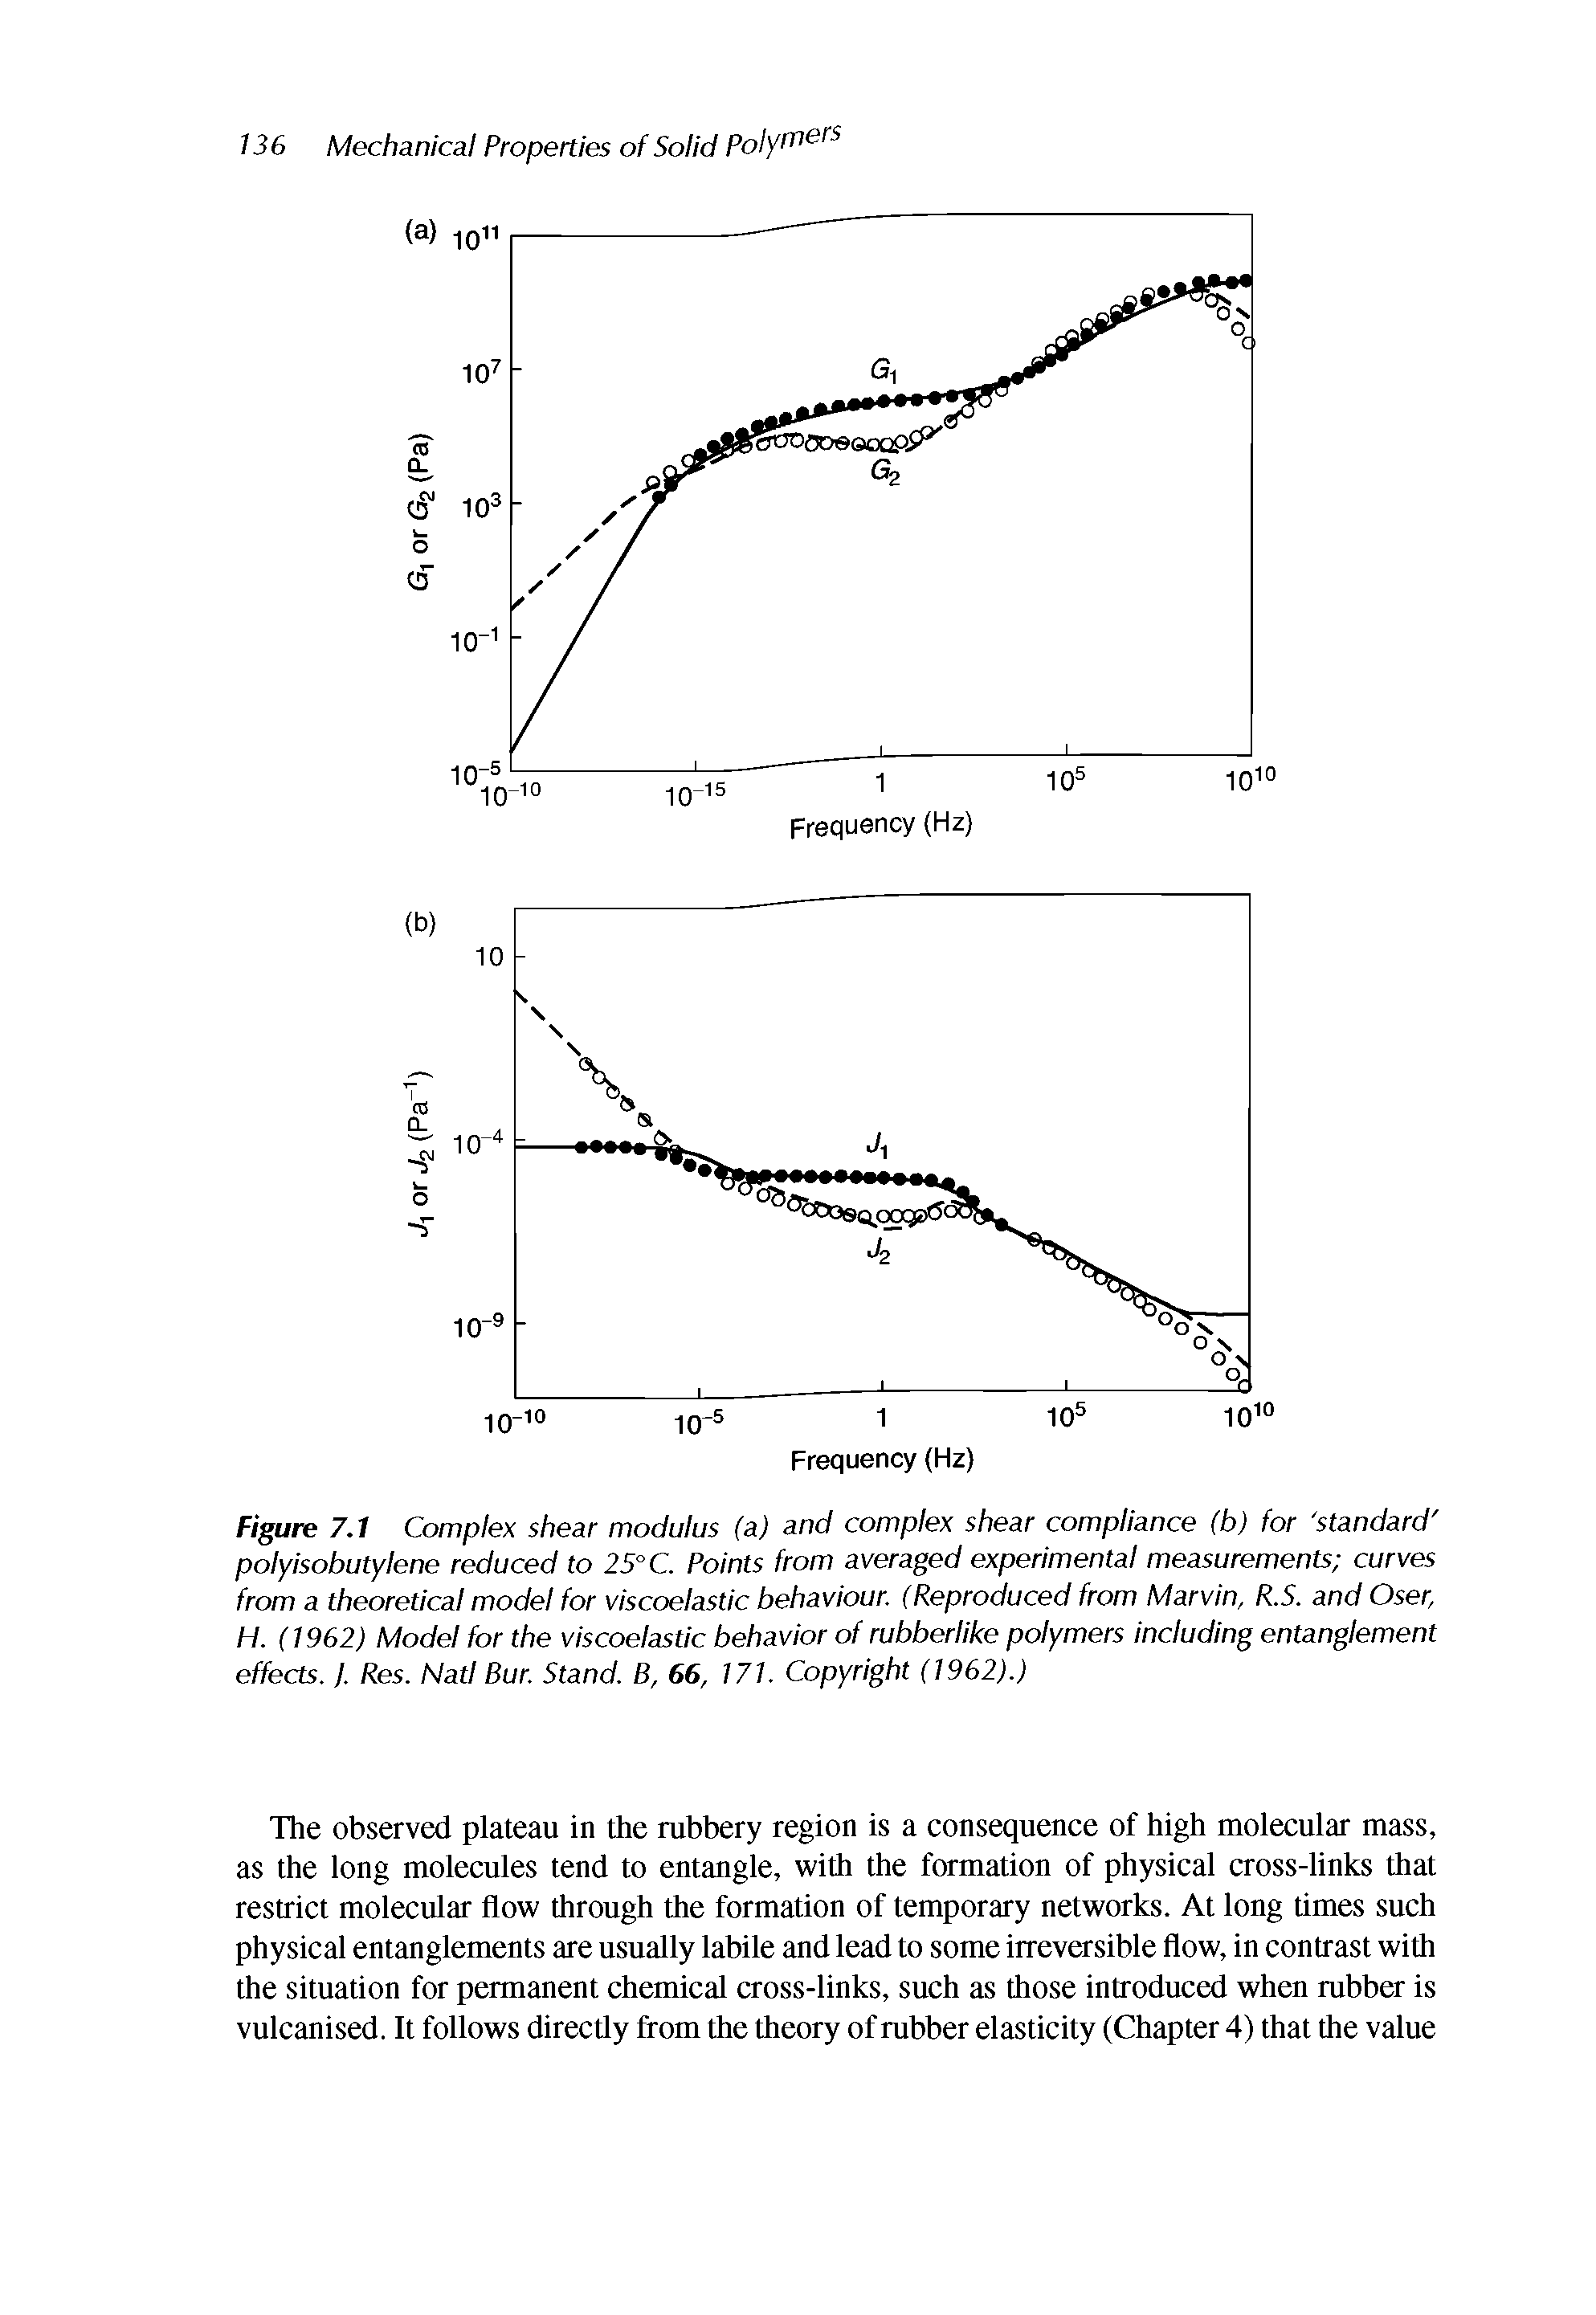 Figure 7.1 Complex shear modulus (a) and complex shear compliance (b) for standard polyisobutylene reduced to 25° C. Points from averaged experimental measurements curves from a theoretical model for viscoelastic behaviour. (Reproduced from Marvin, R.S. and Oser, H. (1962) Model for the viscoelastic behavior of rubberlike polymers including entanglement effects. I. Res. Natl Bur. Stand. B, 66, 17 . Copyright (1962).)...